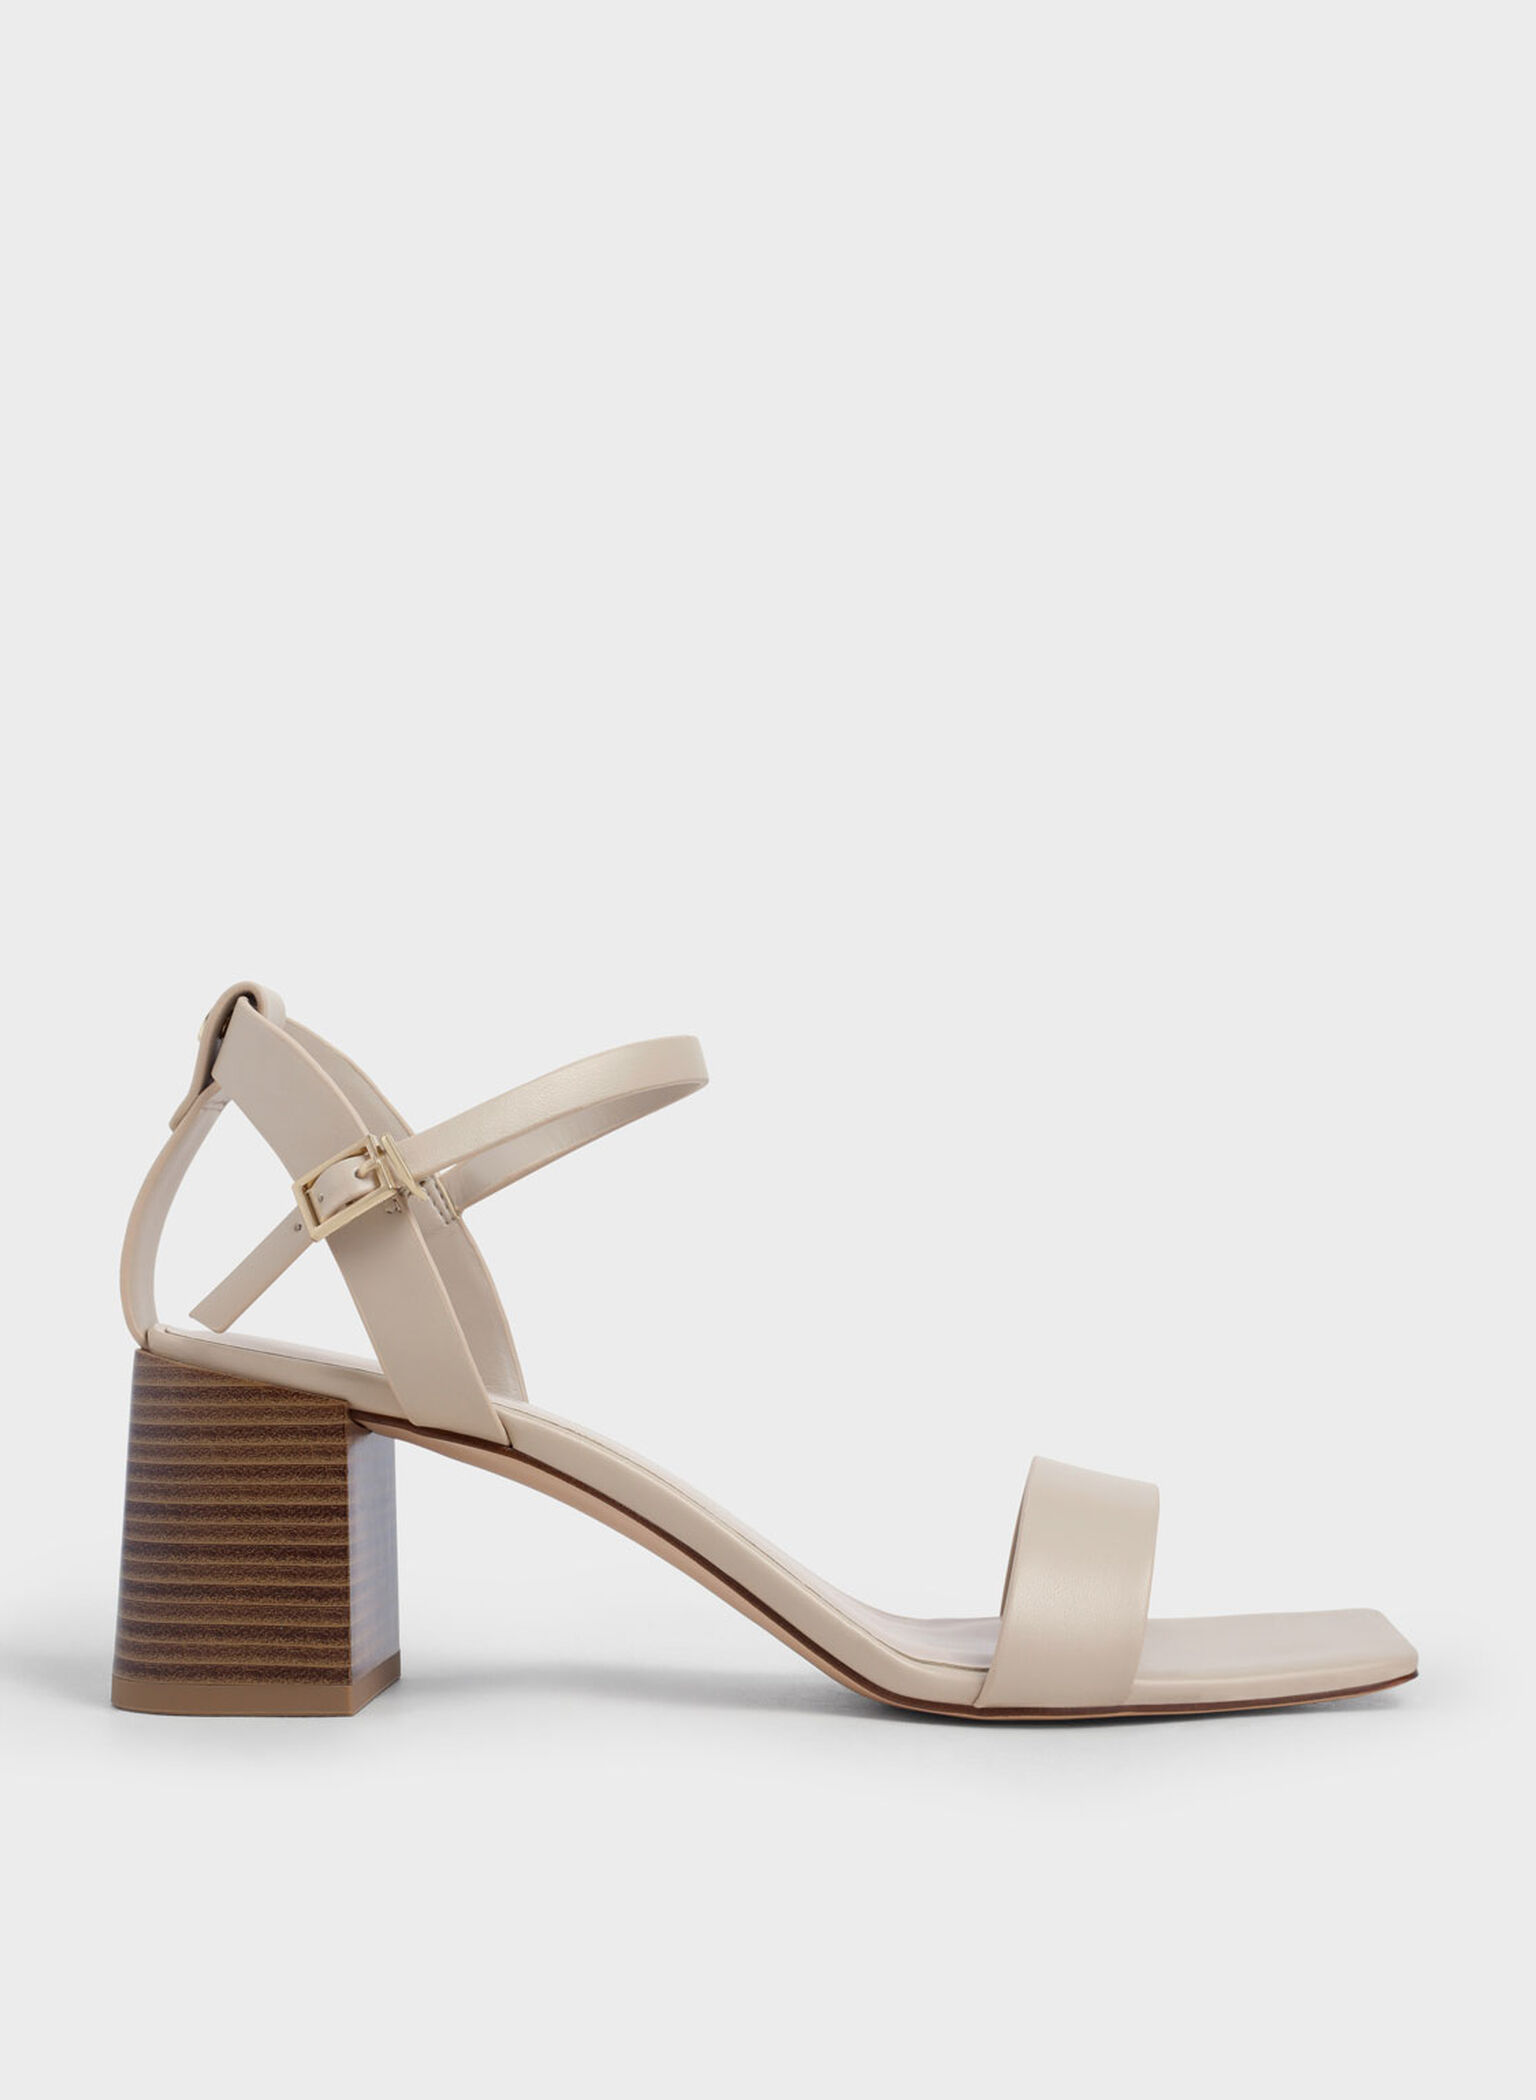 Charles & Keith - Women's Ankle Strap Stacked Heel Sandals, Chalk, US 10